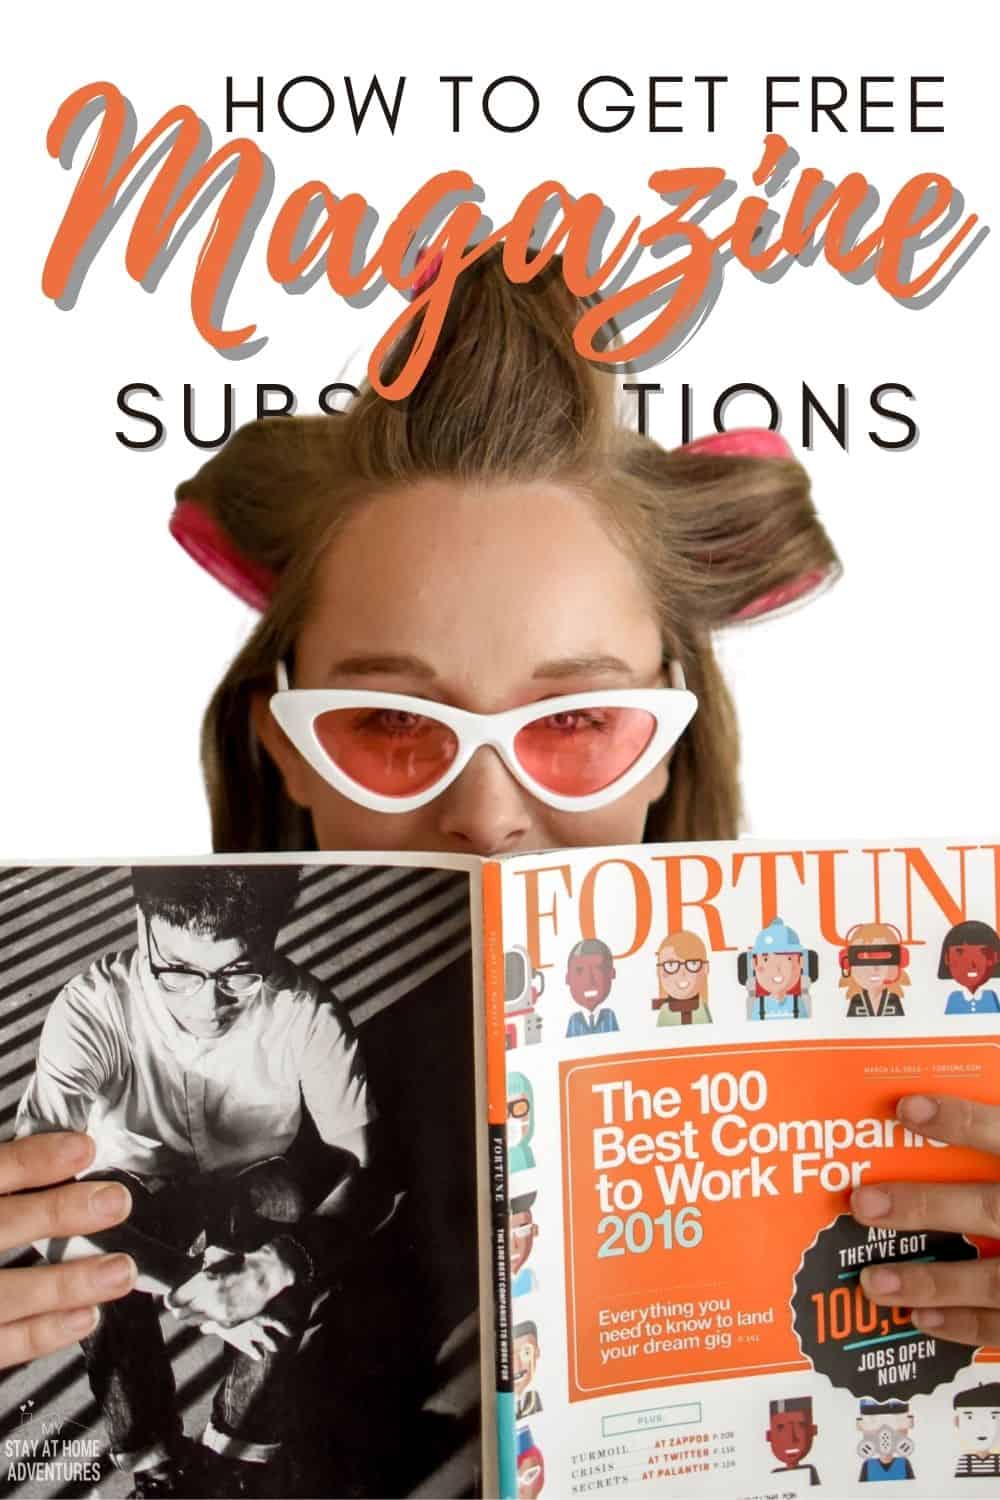 Learn about the different ways you can find free magazine subscriptions and where you can go to get them with no strings attached. via @mystayathome